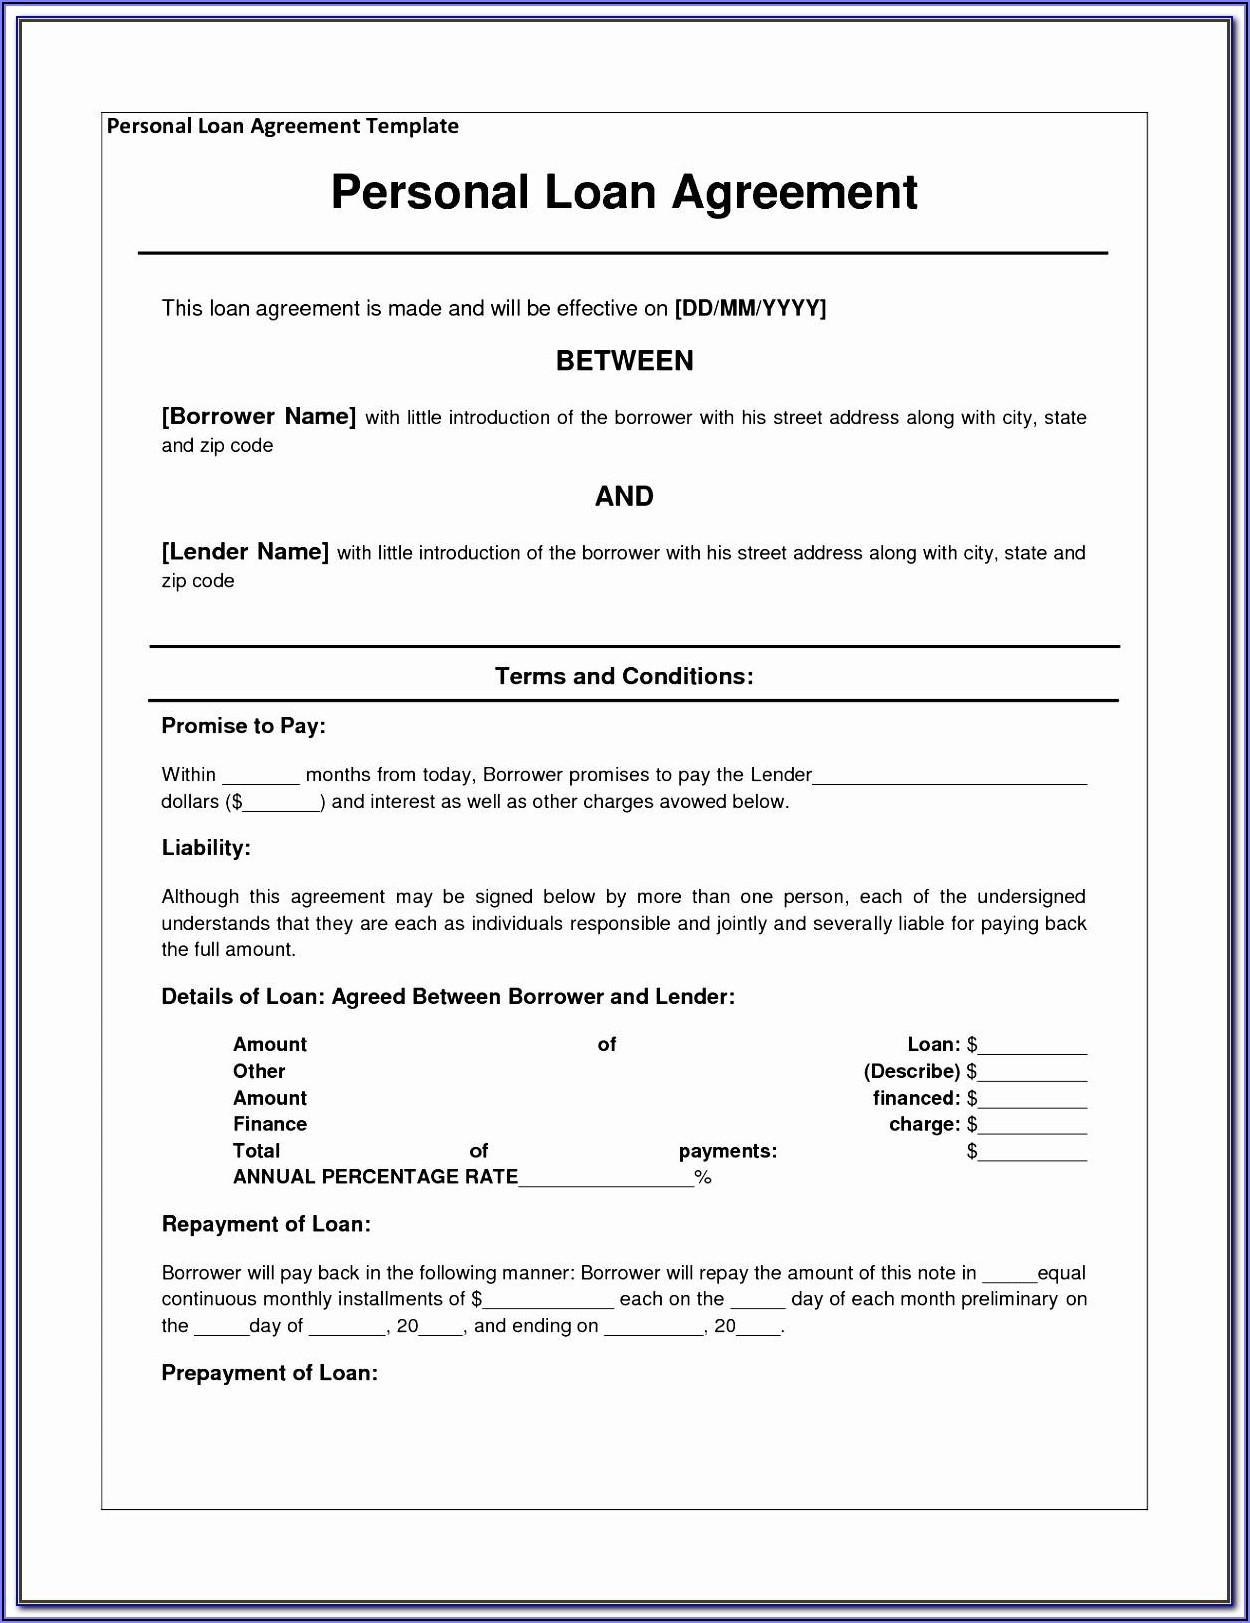 Sample Promissory Note For Personal Loan In India